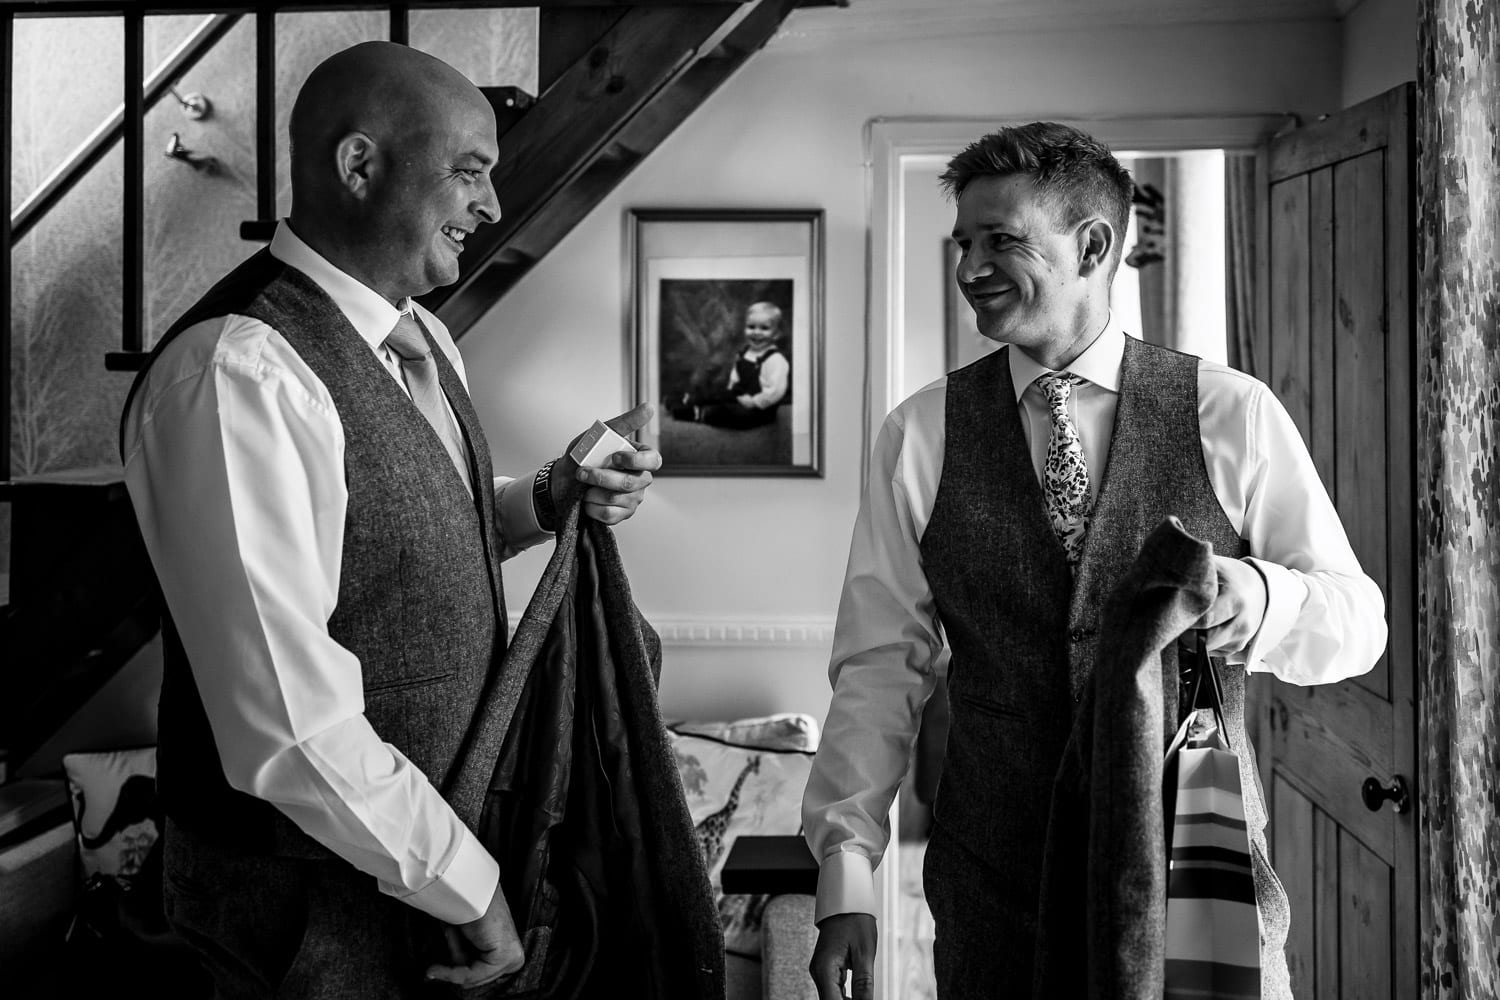 Bridal Barn Wedding Photography captures men getting ready for the big day